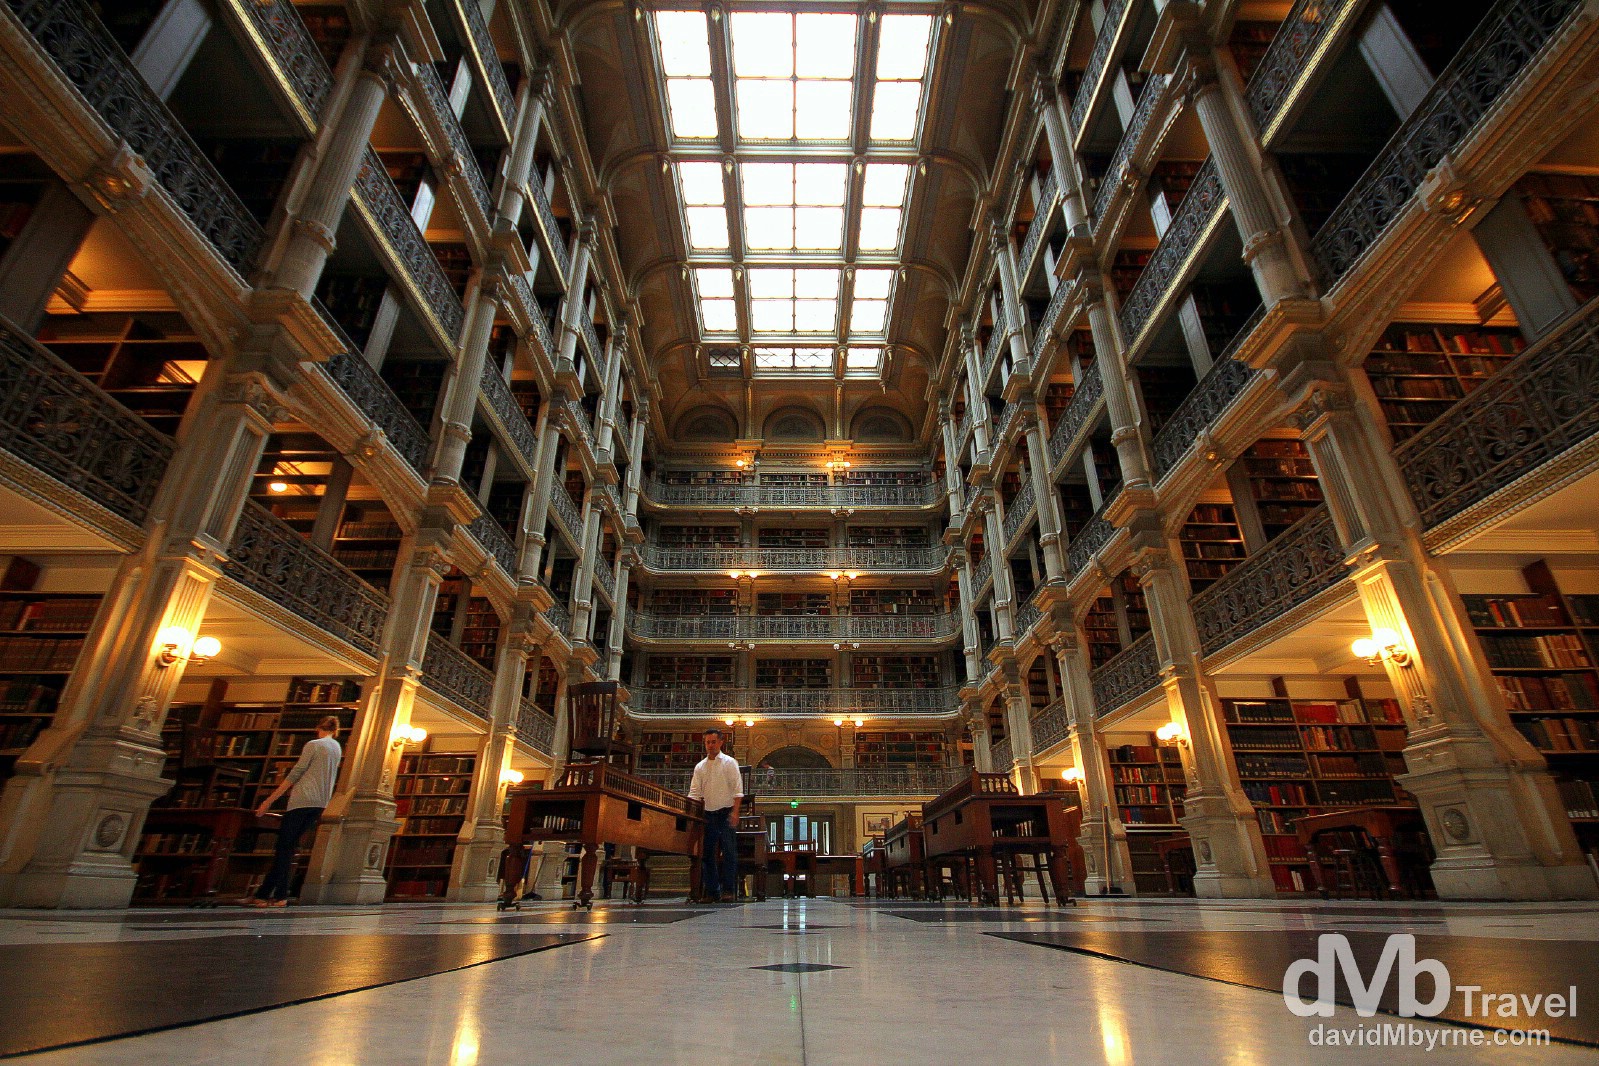 The wonderful interior of the George Peabody Library in The Peabody Institute, Mount Vernon, Baltimore, Maryland, USA. July 9th 2013.